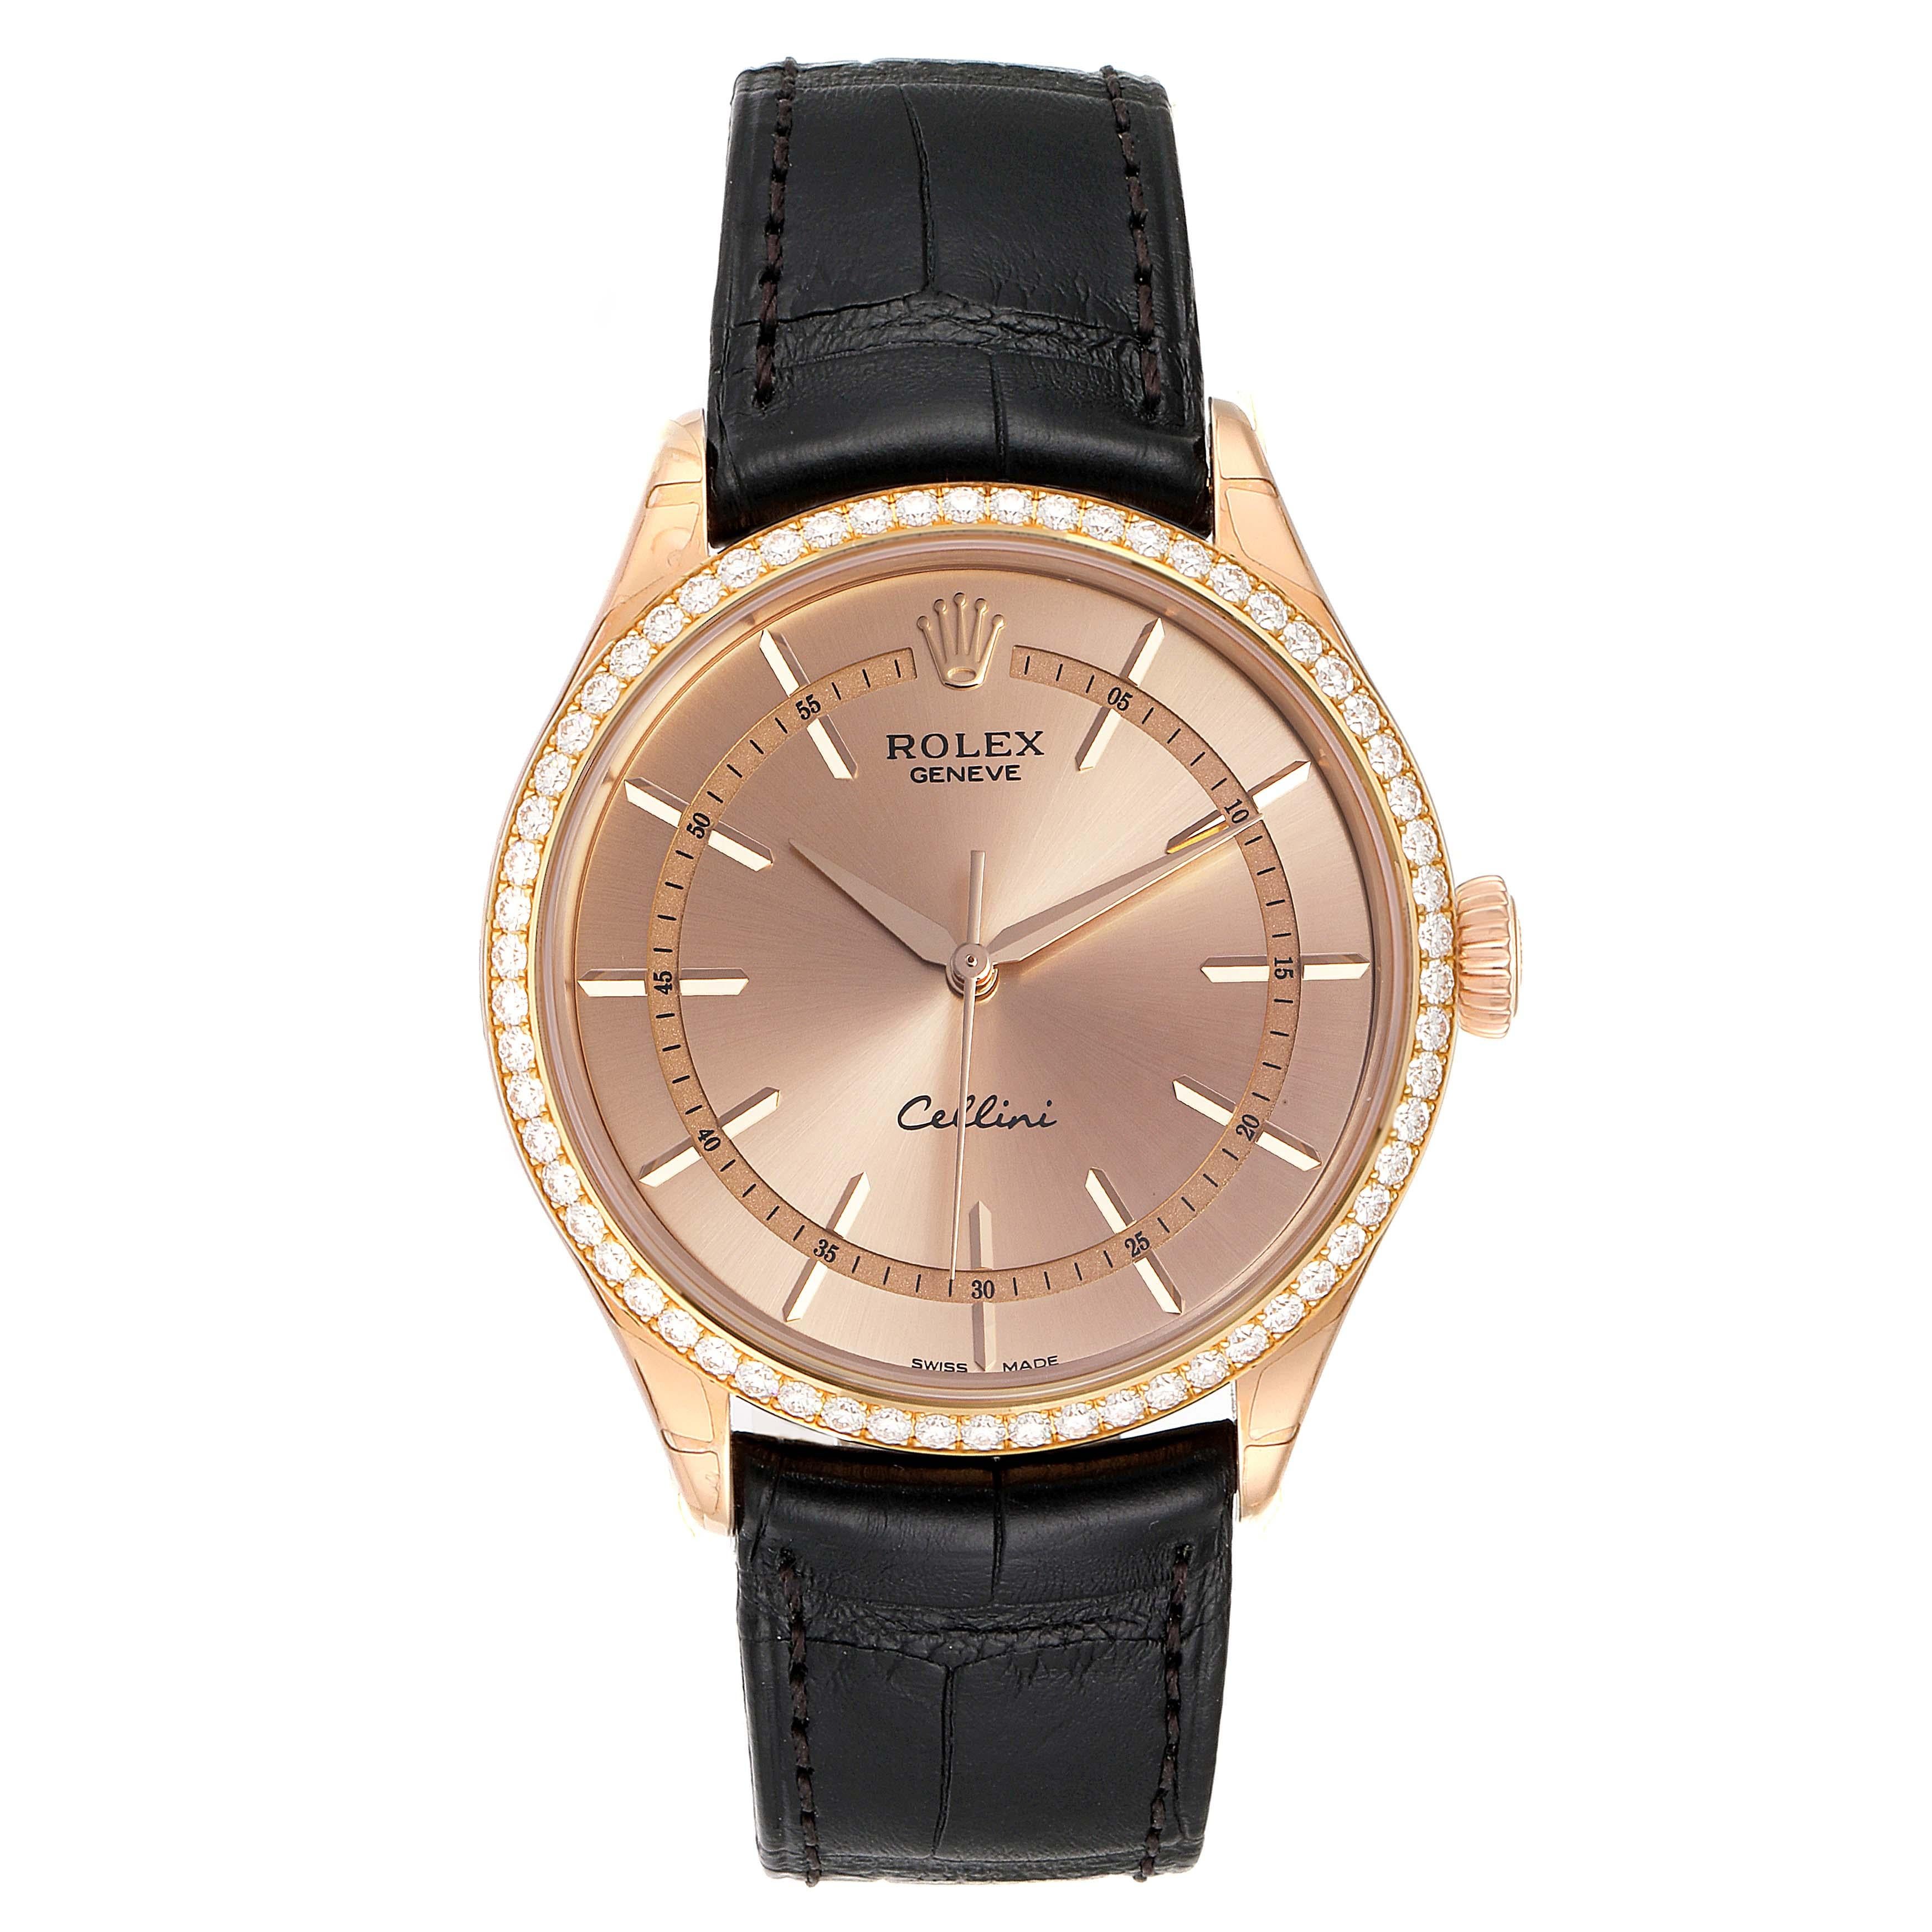 Rolex Cellini Everose Gold Automatic Diamond Mens Watch 50705 Unworn. Automatic self-winding movement. 18K rose gold round case 39 mm in diameter. Rolex logo on a crown. . Scratch resistant sapphire crystal. Pink (Everose tone) dial with baton hour